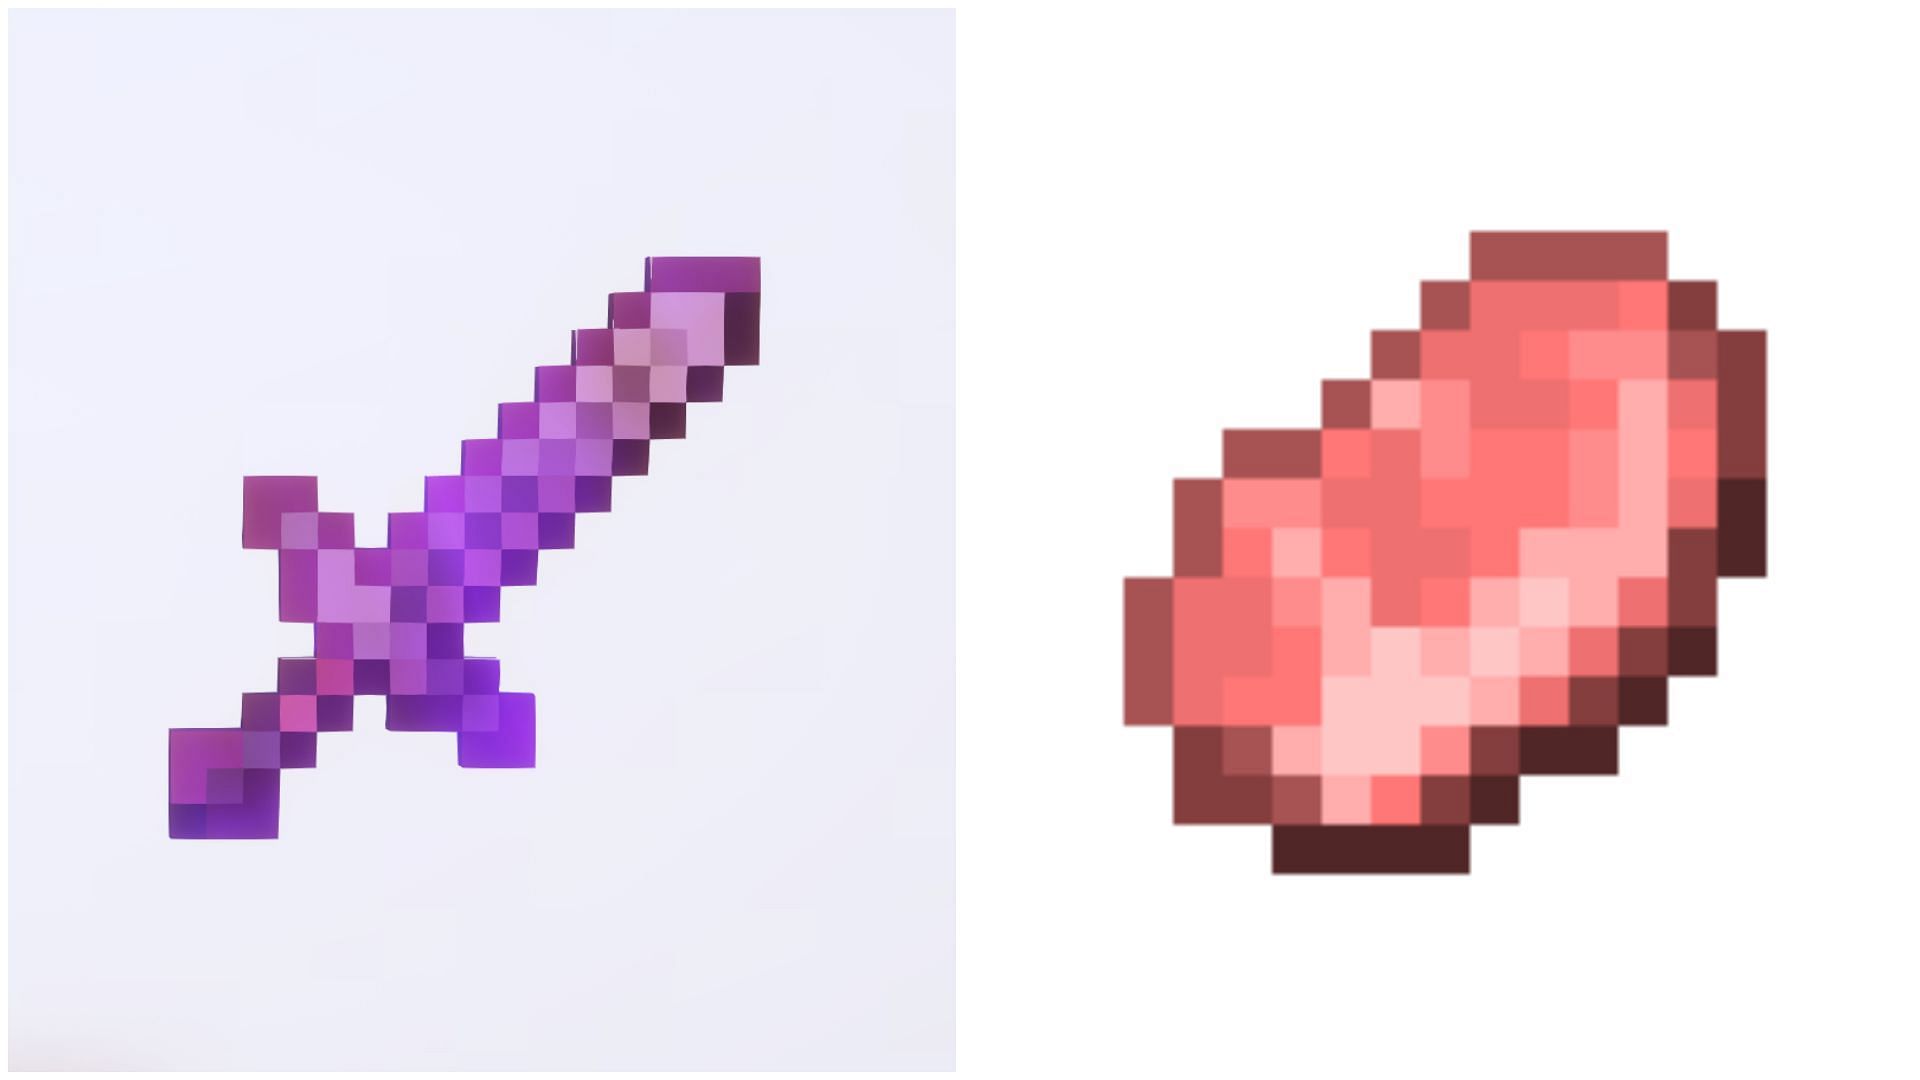 Minecraft Redditor experiences hilarious glitch where their sword coverts into raw porkchop (Image via Mojang)